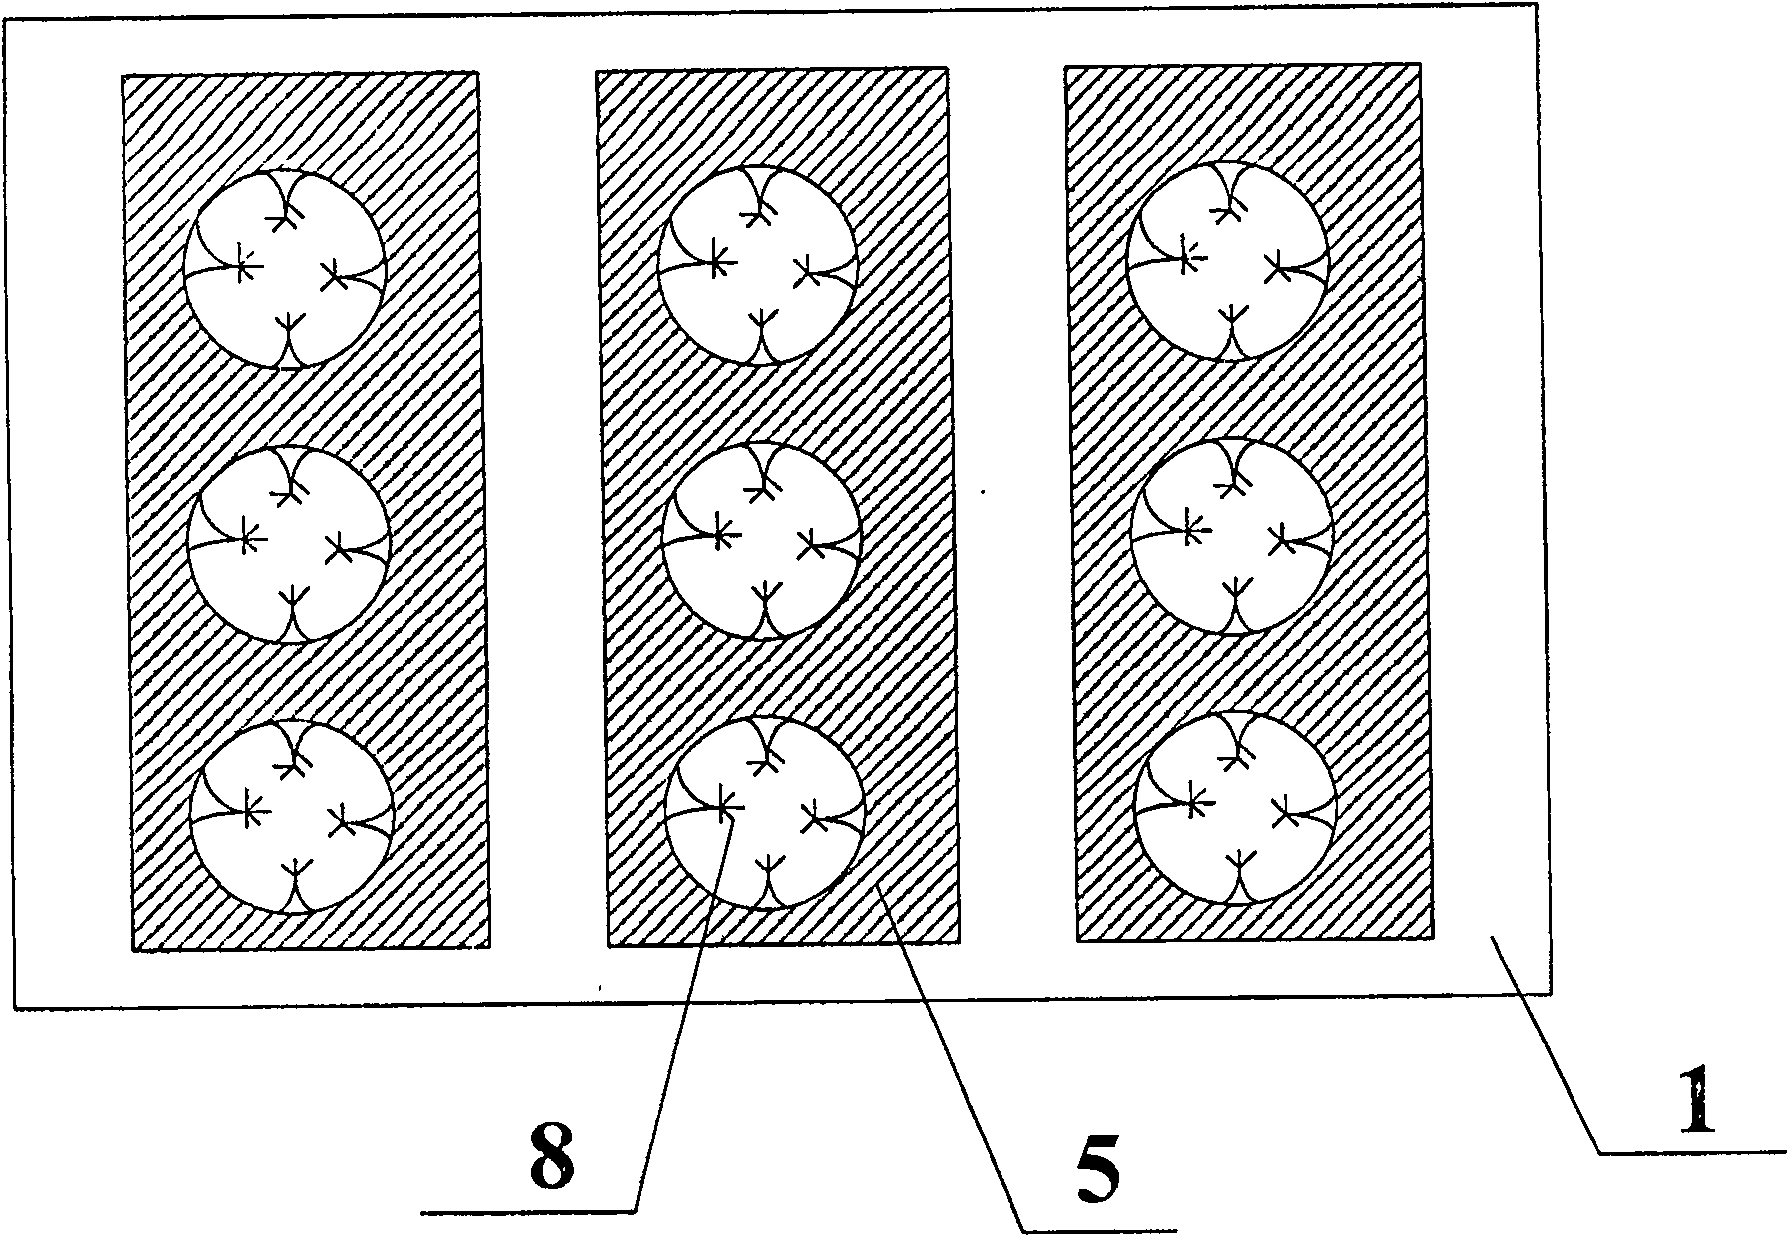 Annular blade type cathode emitting structural panel display device and its production technique